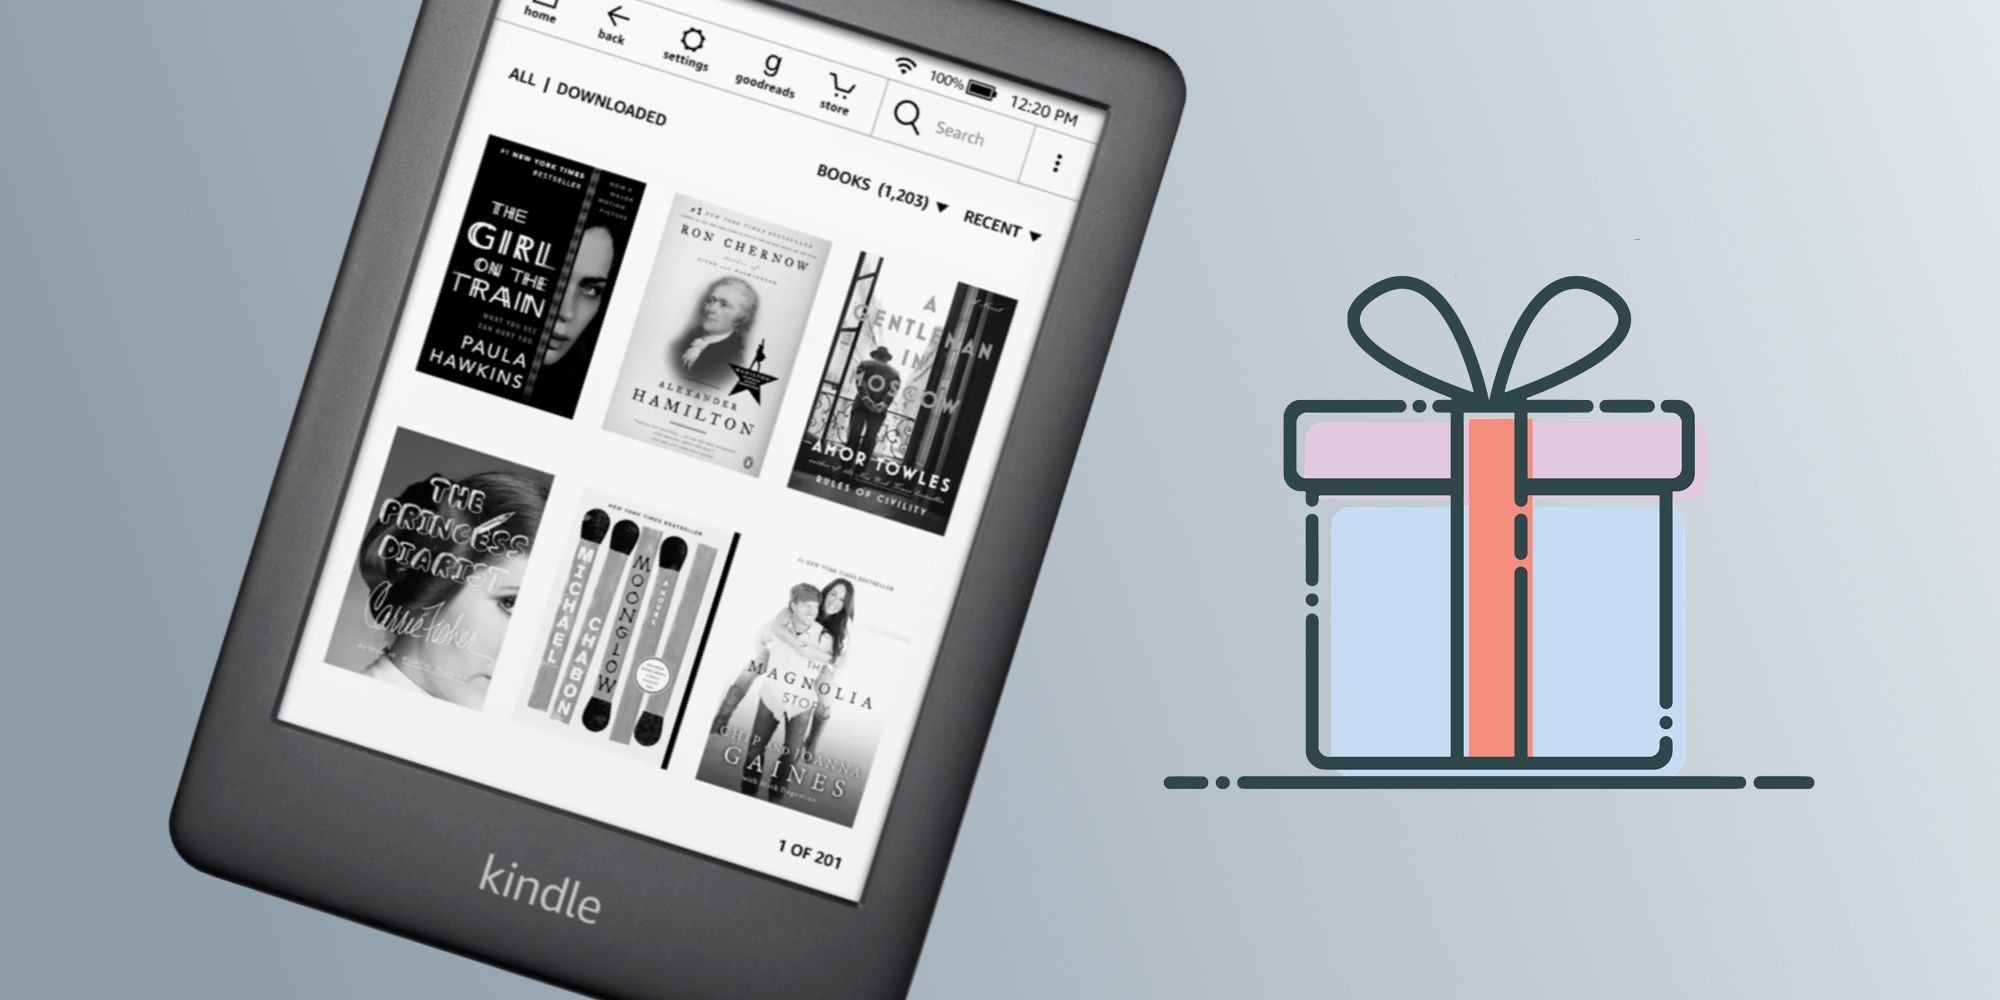 The 11th-Gen Kindle next to a vector image of a gift-wrapped box, over a gradient gray background